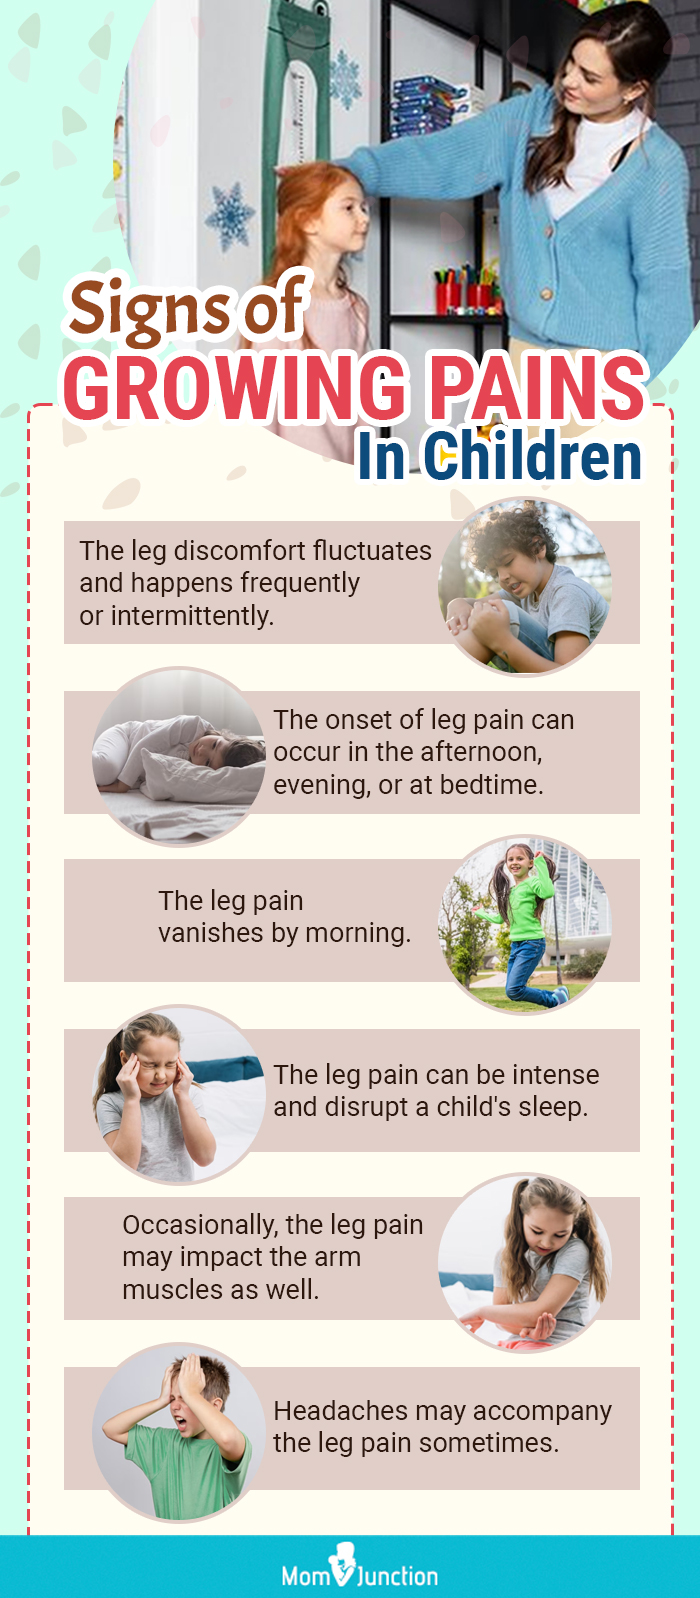 signs of growing pains in children (infographic)